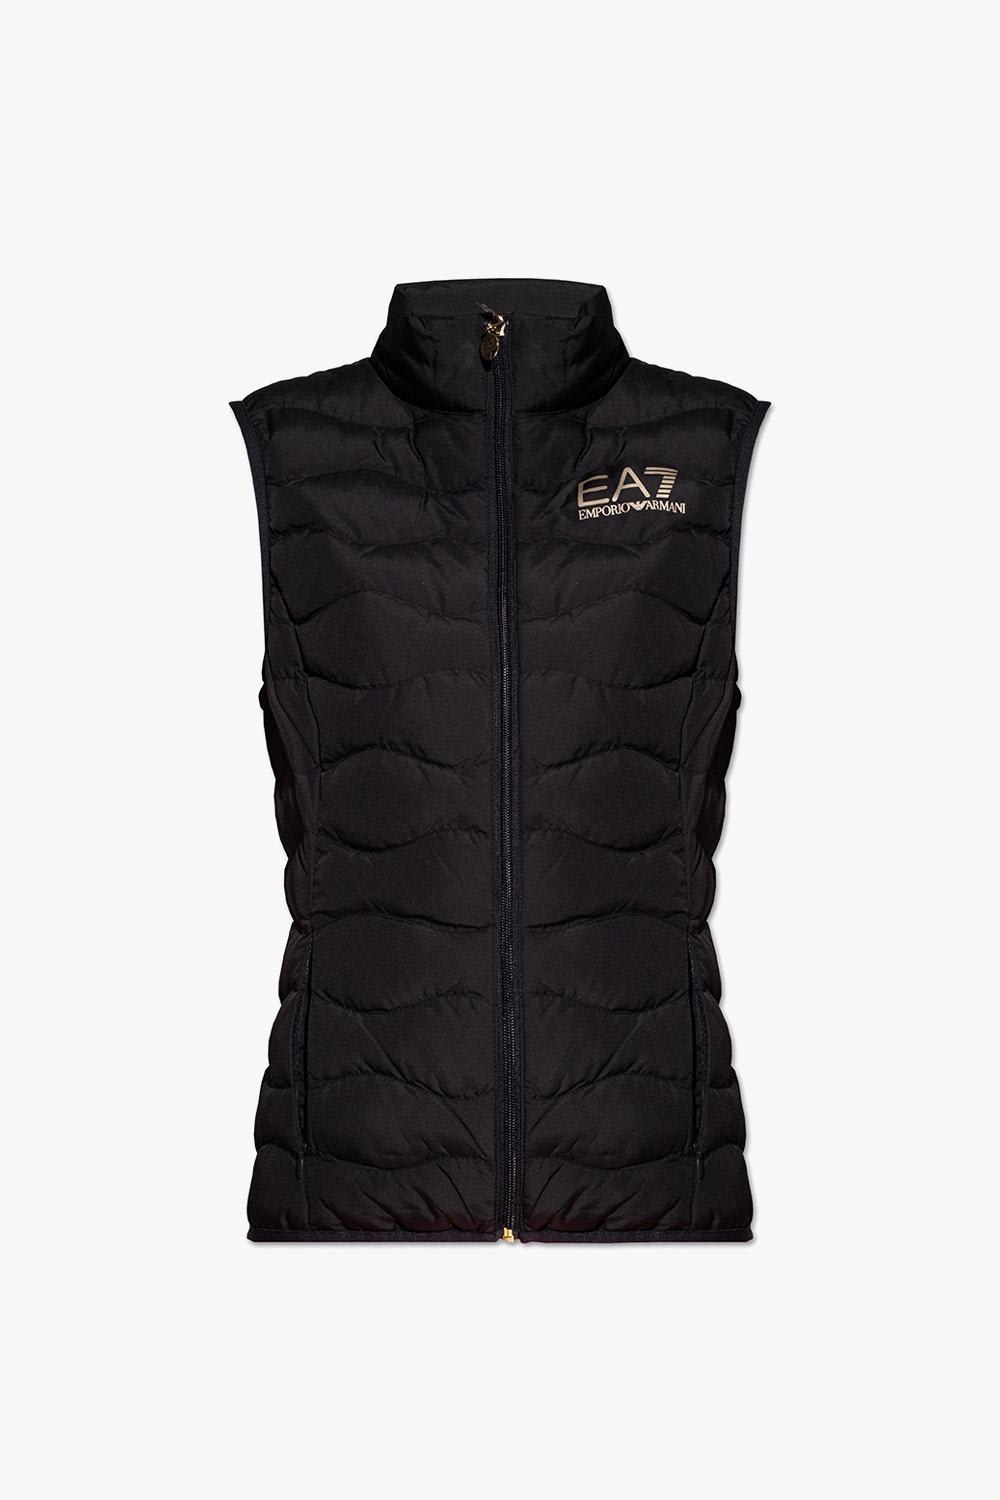 EA7 INSULATED VEST WITH LOGO